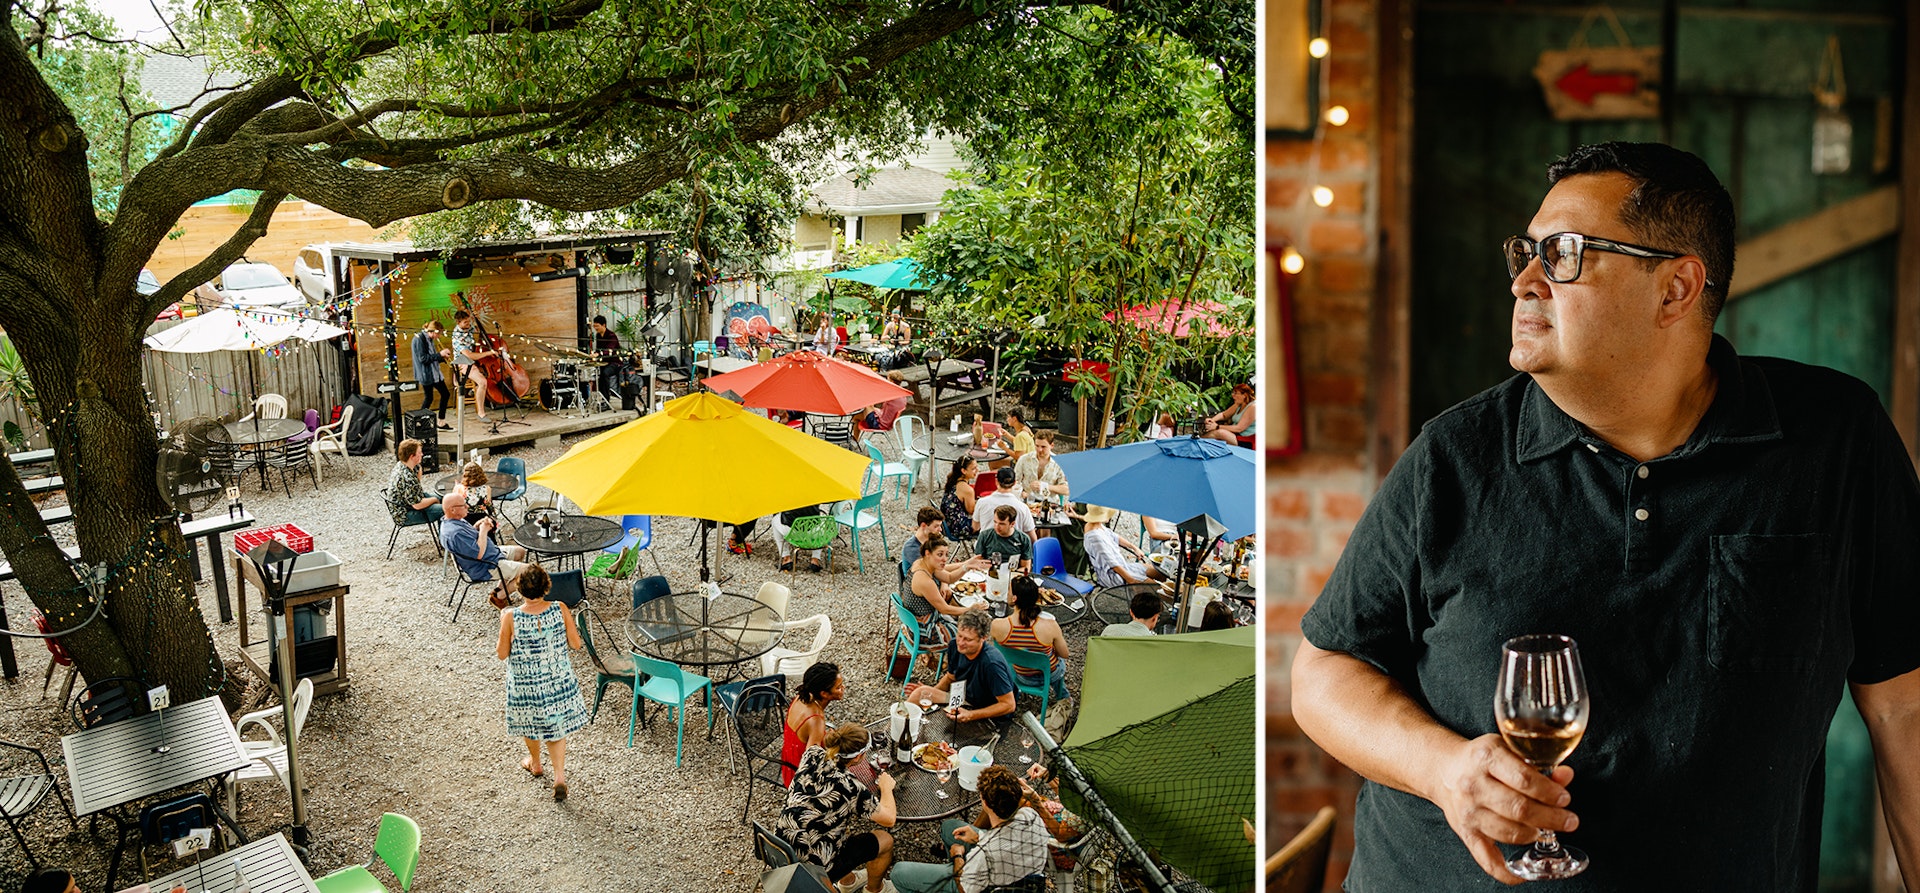 LEFT: Bacchanal, a restaurant, wine bar, and venue located in the Bywater. A small speakeasy-style restaurant that started before Hurricane Katrina but then really took off after, as out-of-towners became interested in and moved to the Bywater neighborhood